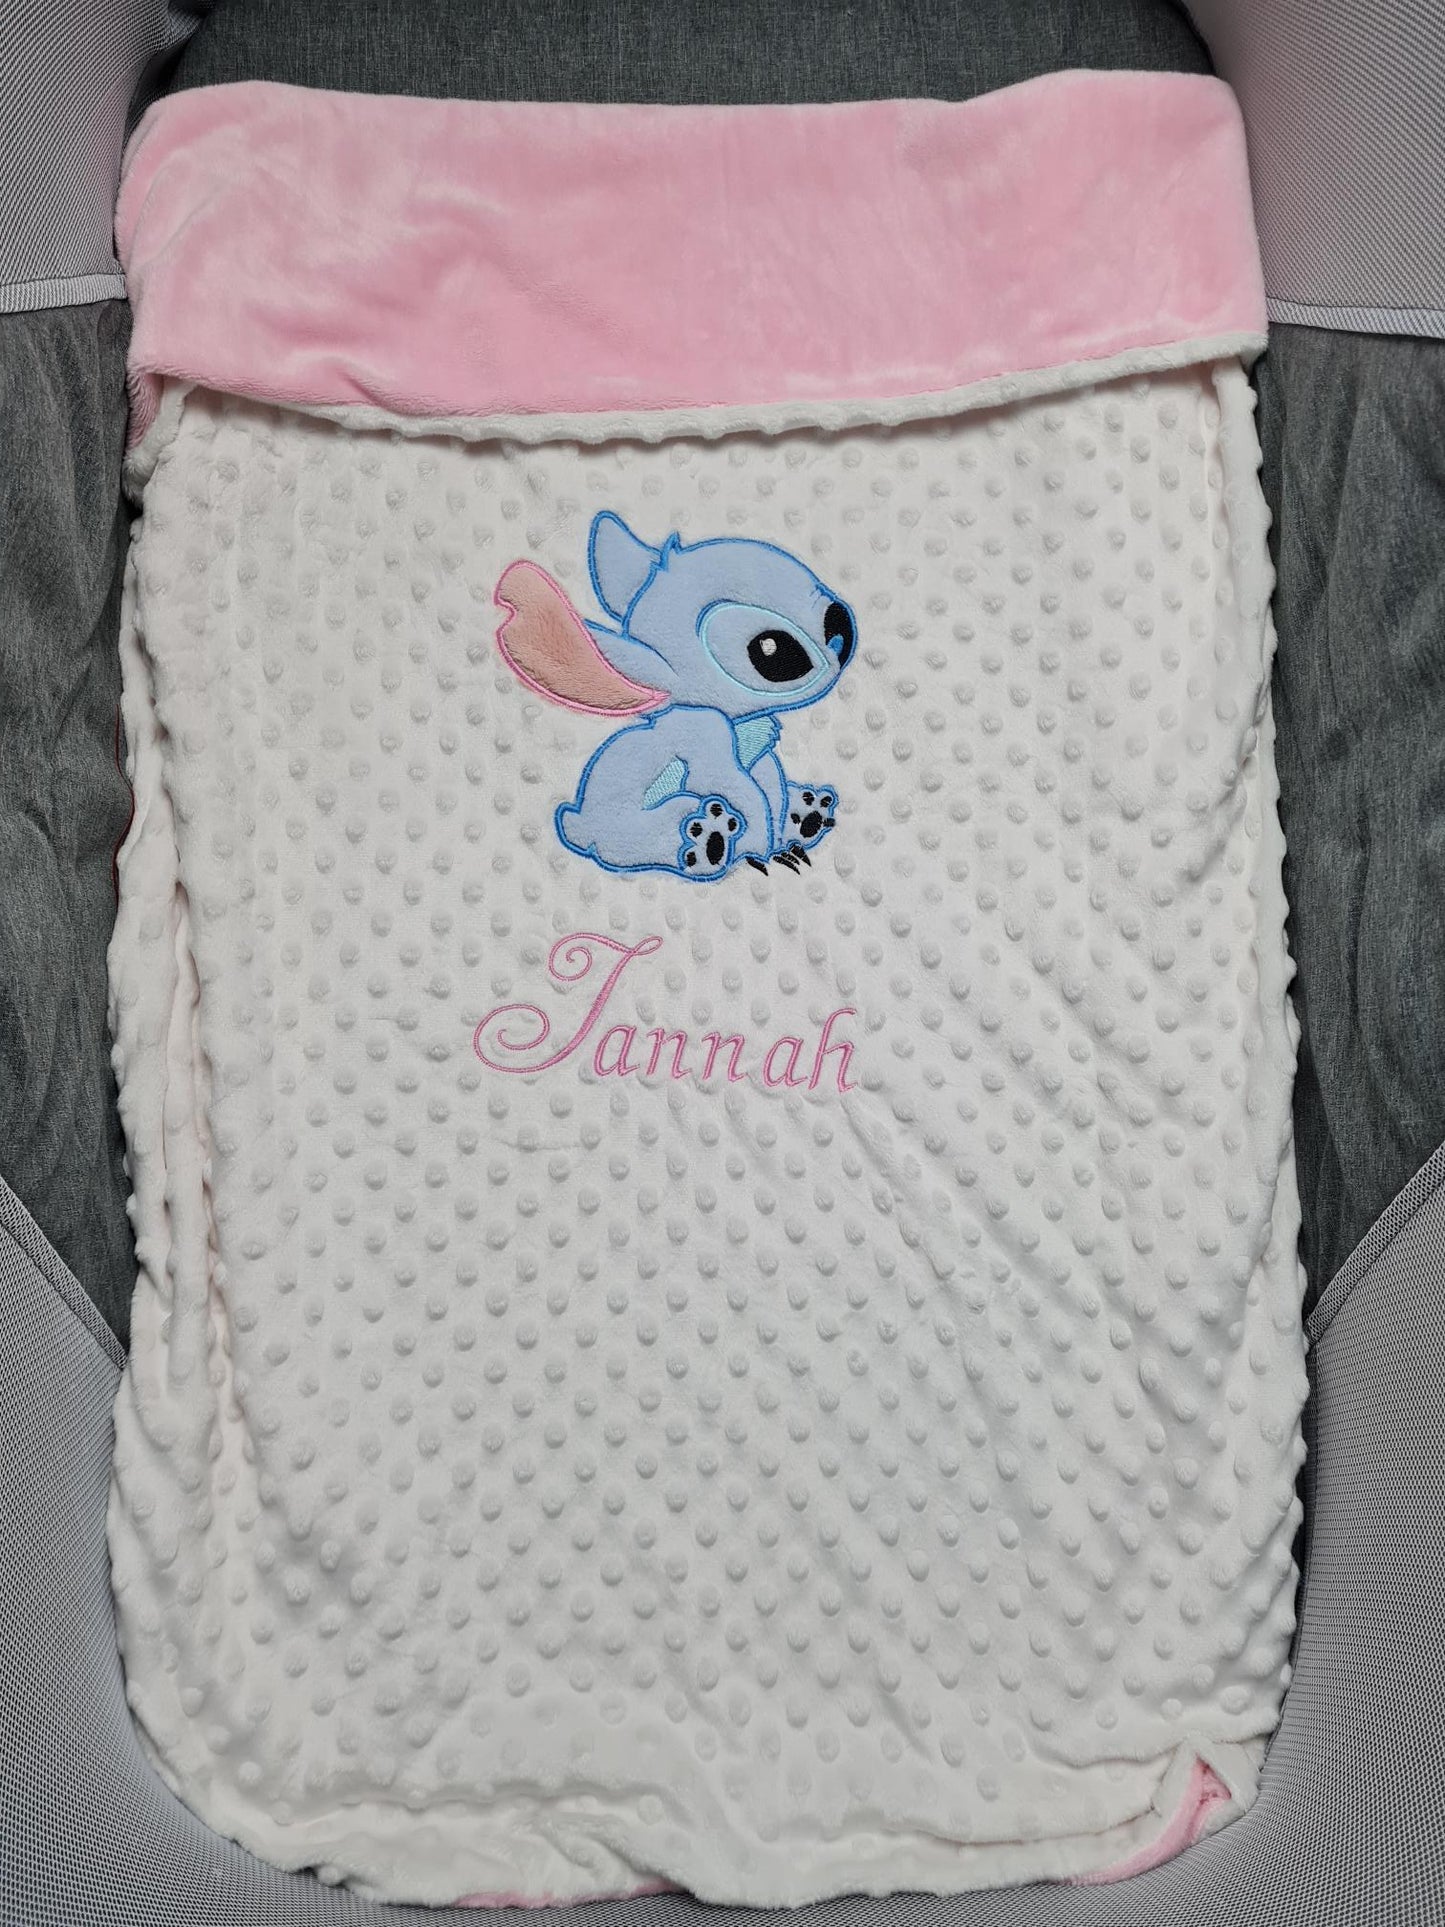 Blanket with personalized girl embroidery